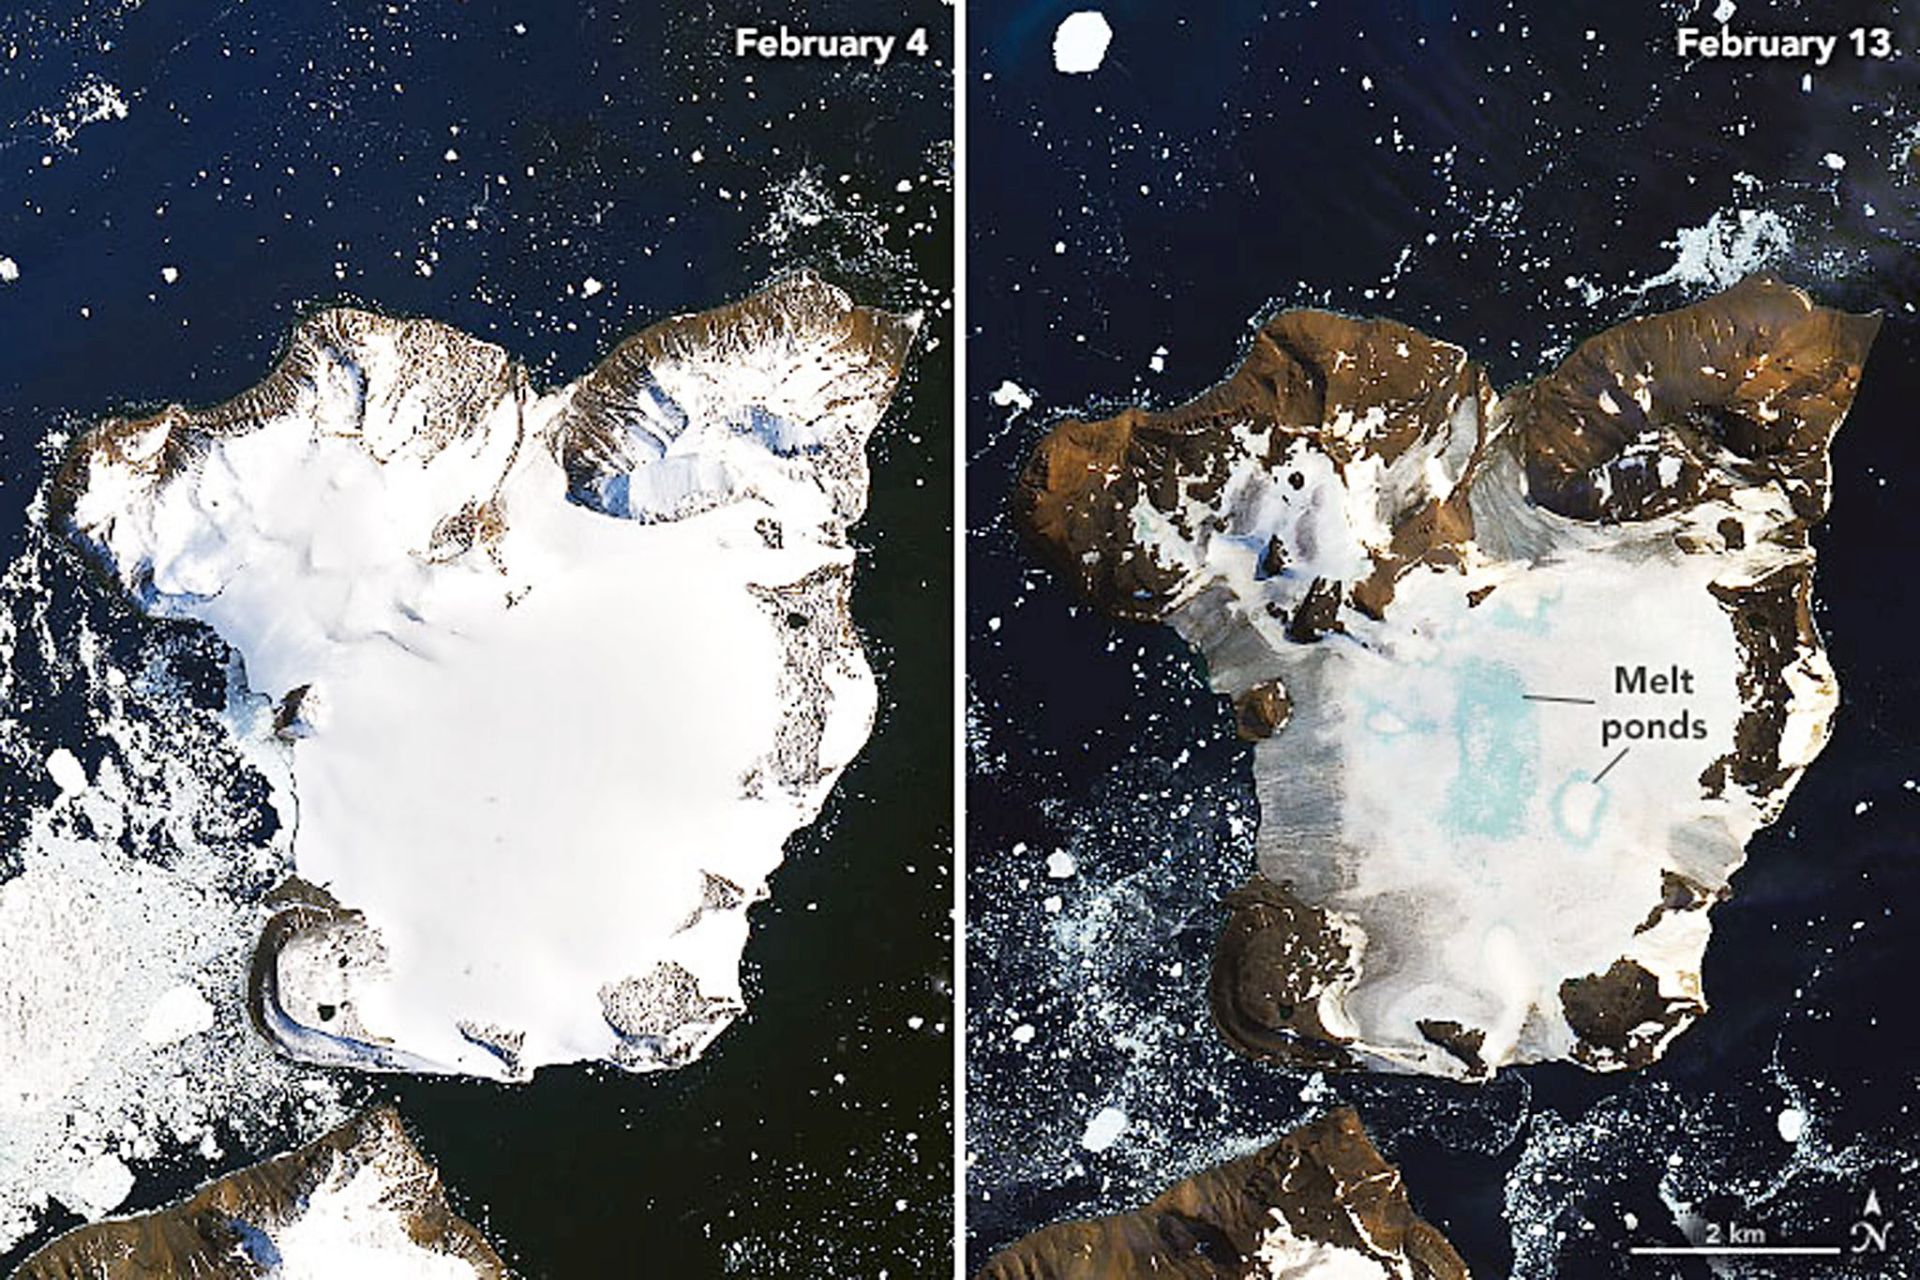 epa08234819 (COMPOSITE) A handout composite picture made available by the National Aeronautics and Space Administration (NASA) showing melting on the ice cap of Eagle Island, off Graham Land, Antarctica, taken on 04 February 2020 (L) and on 13 February 2020 (issued 21 February 2020). Weather stations on 06 February 2020 recorded the hottest temperature on record for Antarctica. Thermometers at the Esperanza Base on the northern tip of the Antarctic Peninsula reached 18.3 degrees Celsius, around the same temperature on that day in Los Angeles, California, USA. The warm spell caused widespread melting on nearby glaciers. This February heatwave was the third major melt event of the 2019-2020 summer, following warm spells in November 2019 and January 2020.  EPA/NASA EARTH OBSERVATORY HANDOUT  HANDOUT EDITORIAL USE ONLY/NO SALES